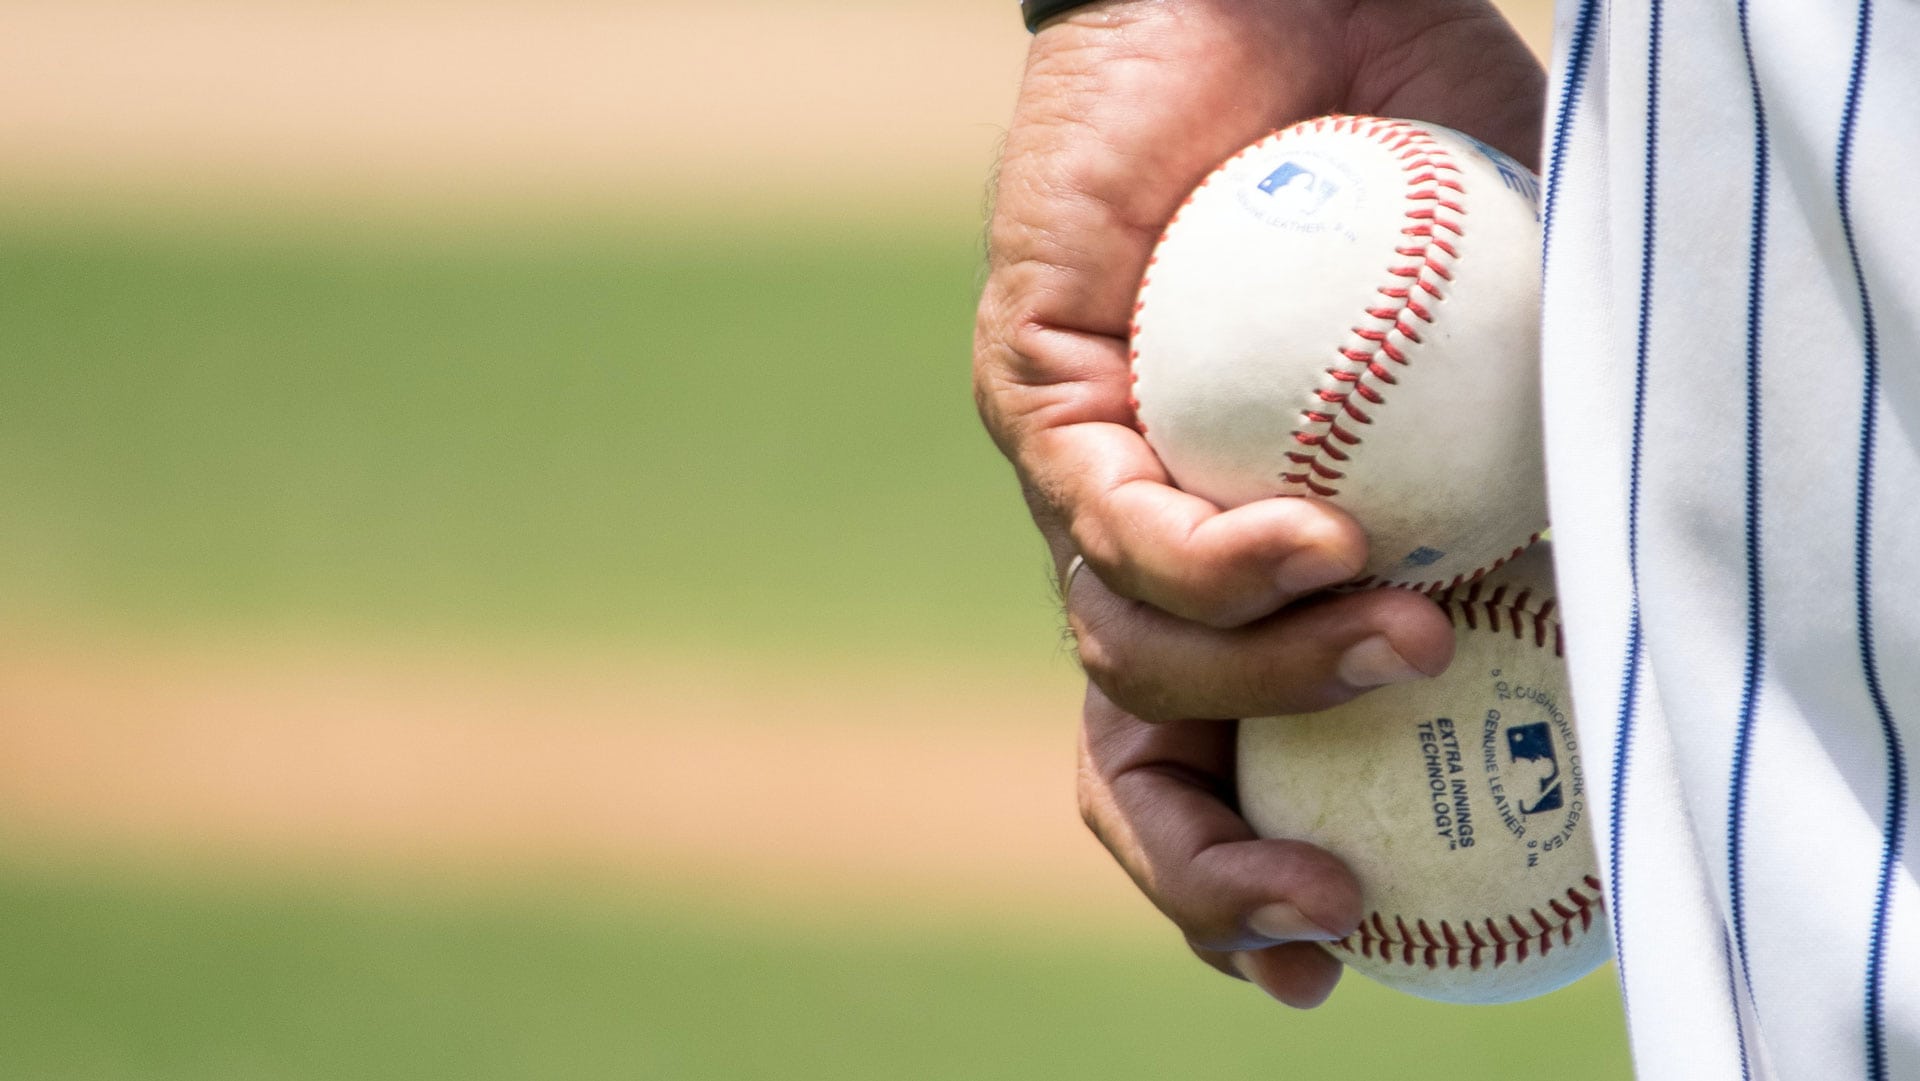 Settlement Approved In Major League Baseball Class Action